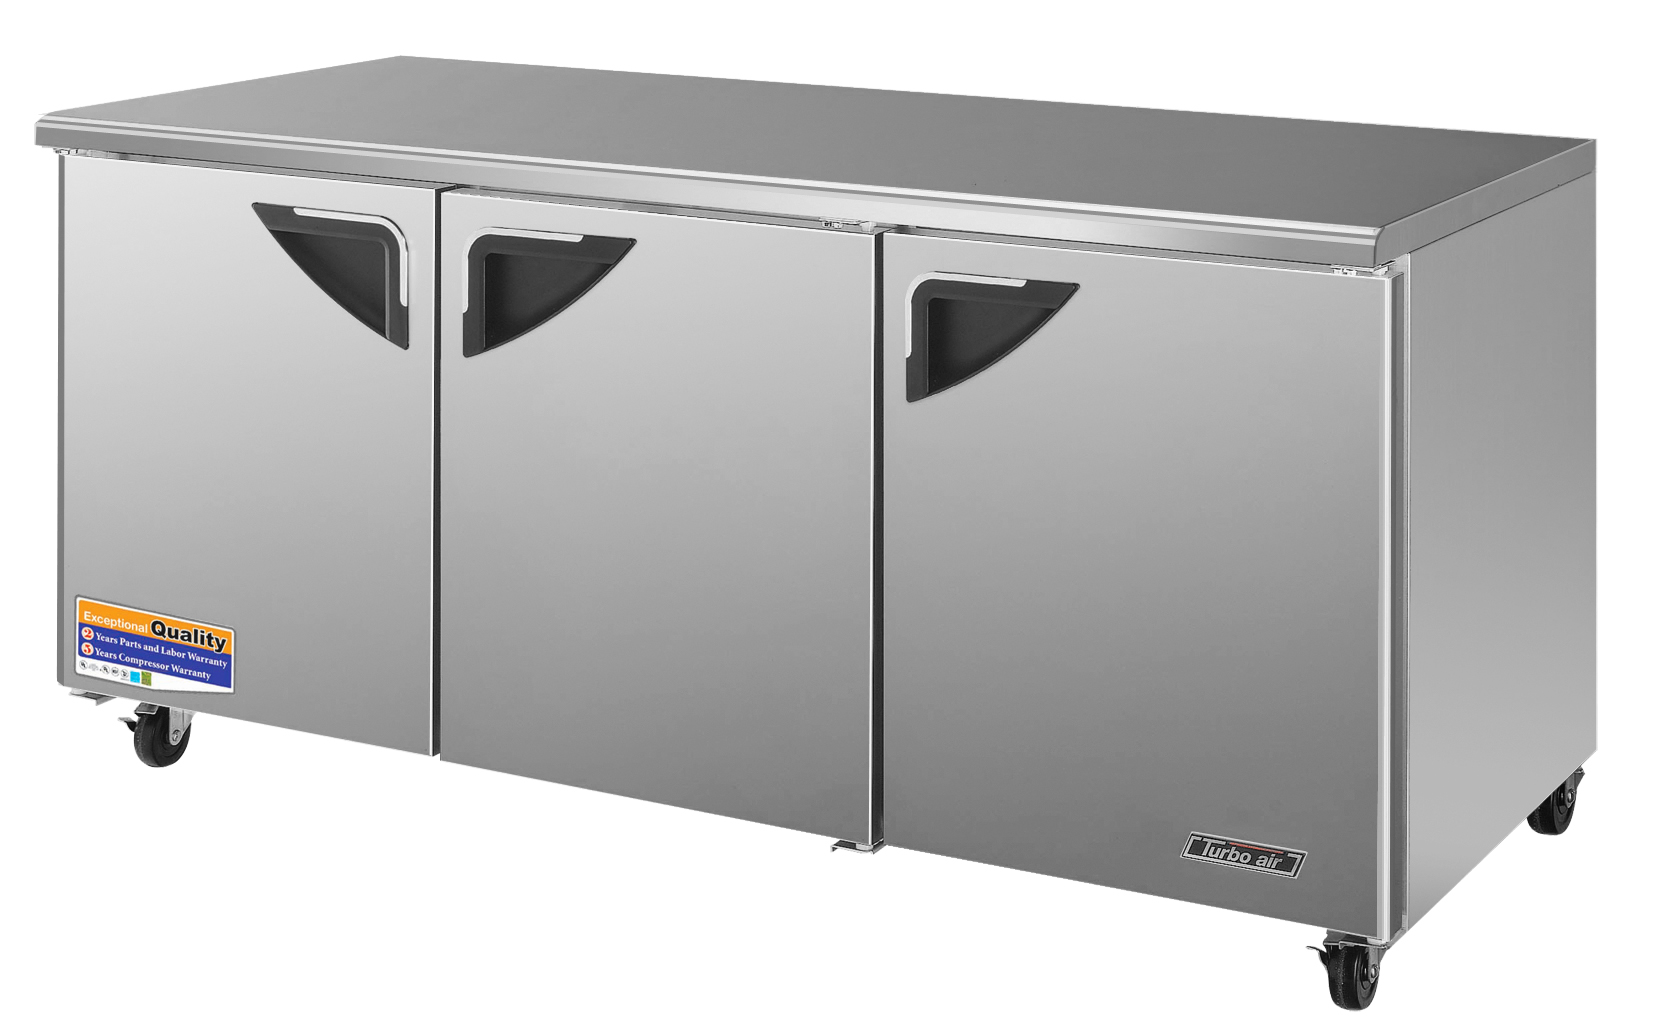 Super Deluxe Series Undercounter Refrigerator, 3-section - Click Image to Close